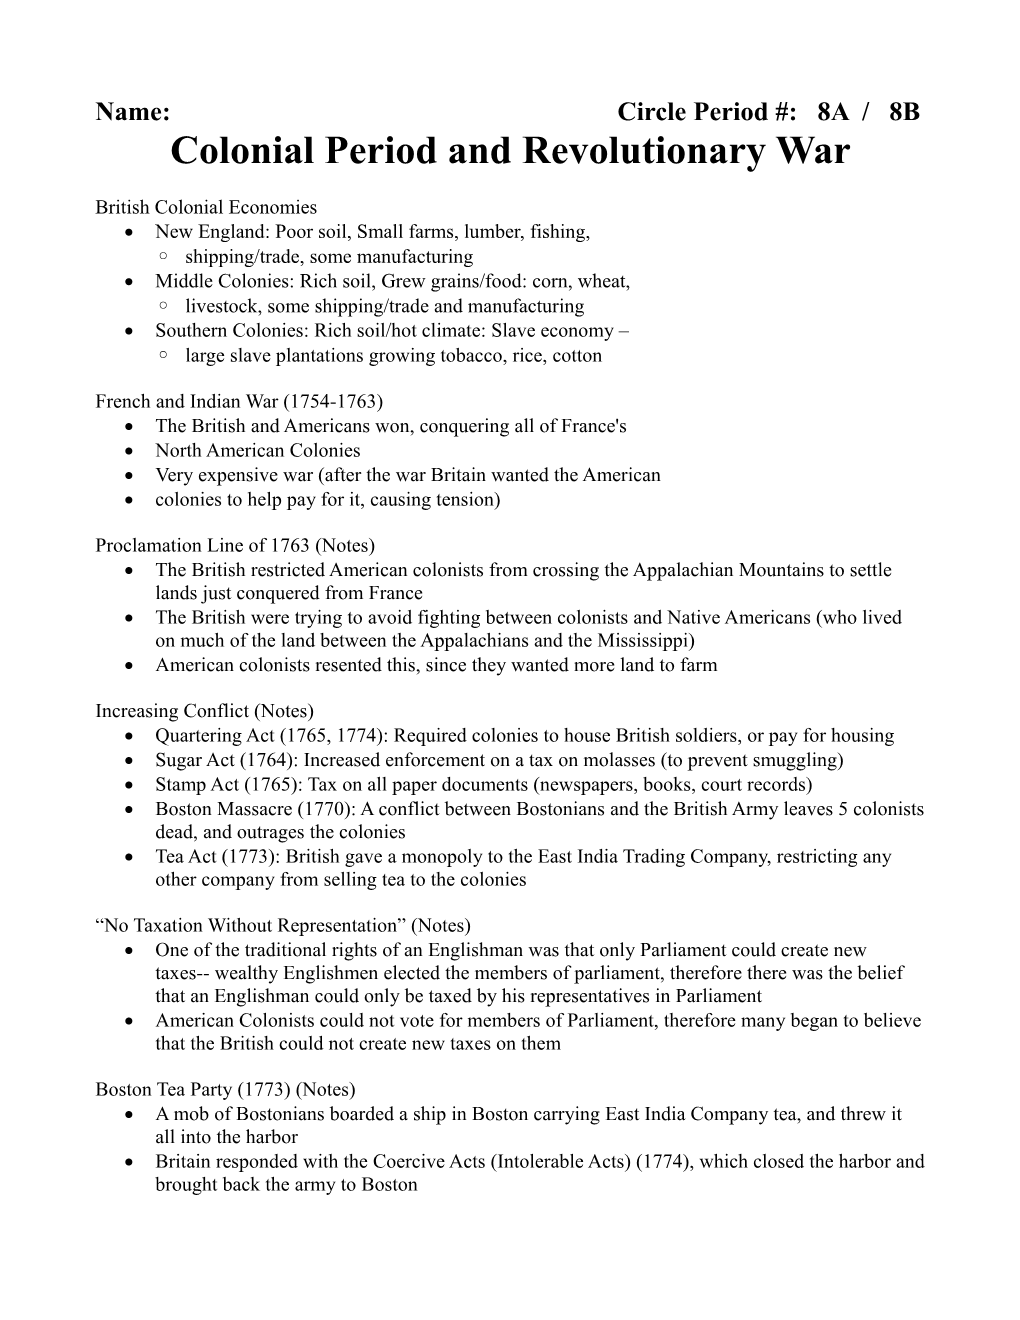 Colonial Period and Revolutionary War